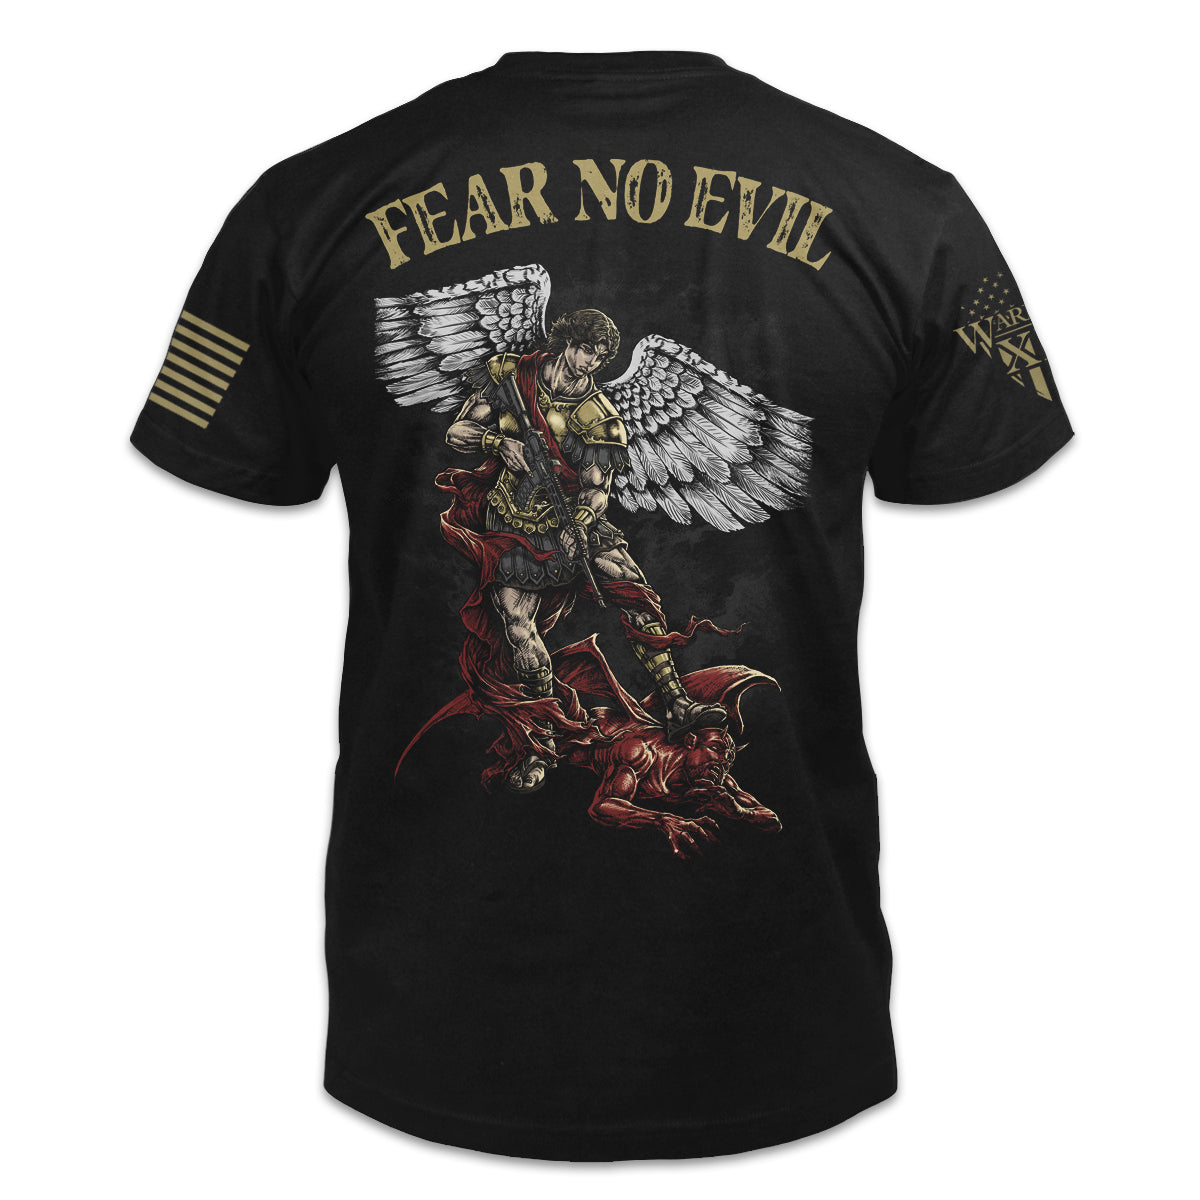 A black t-shirt with the words "fear no evil" with a Saint Michael the Archangel holding a gun with his foot on Satan printed on the back of the shirt.